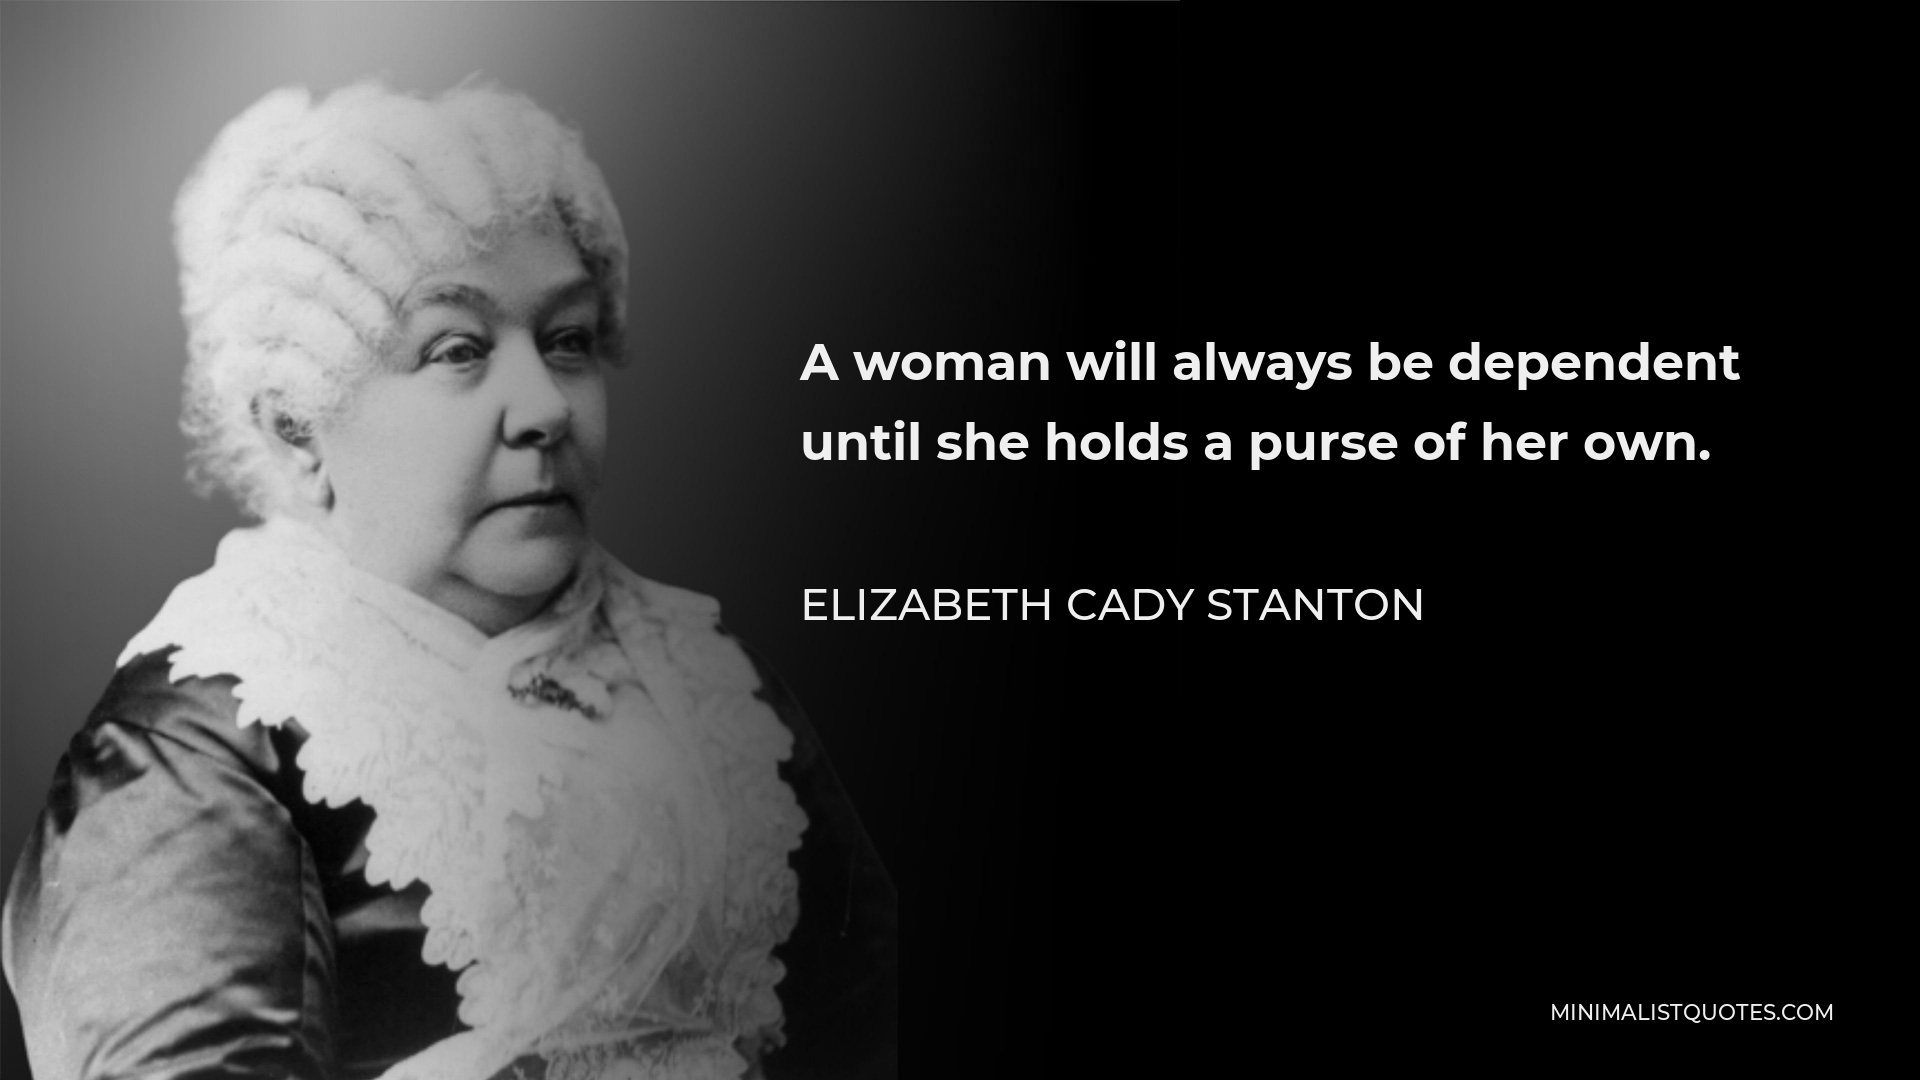 Elizabeth Cady Stanton Quote - A woman will always be dependent until she holds a purse of her own.